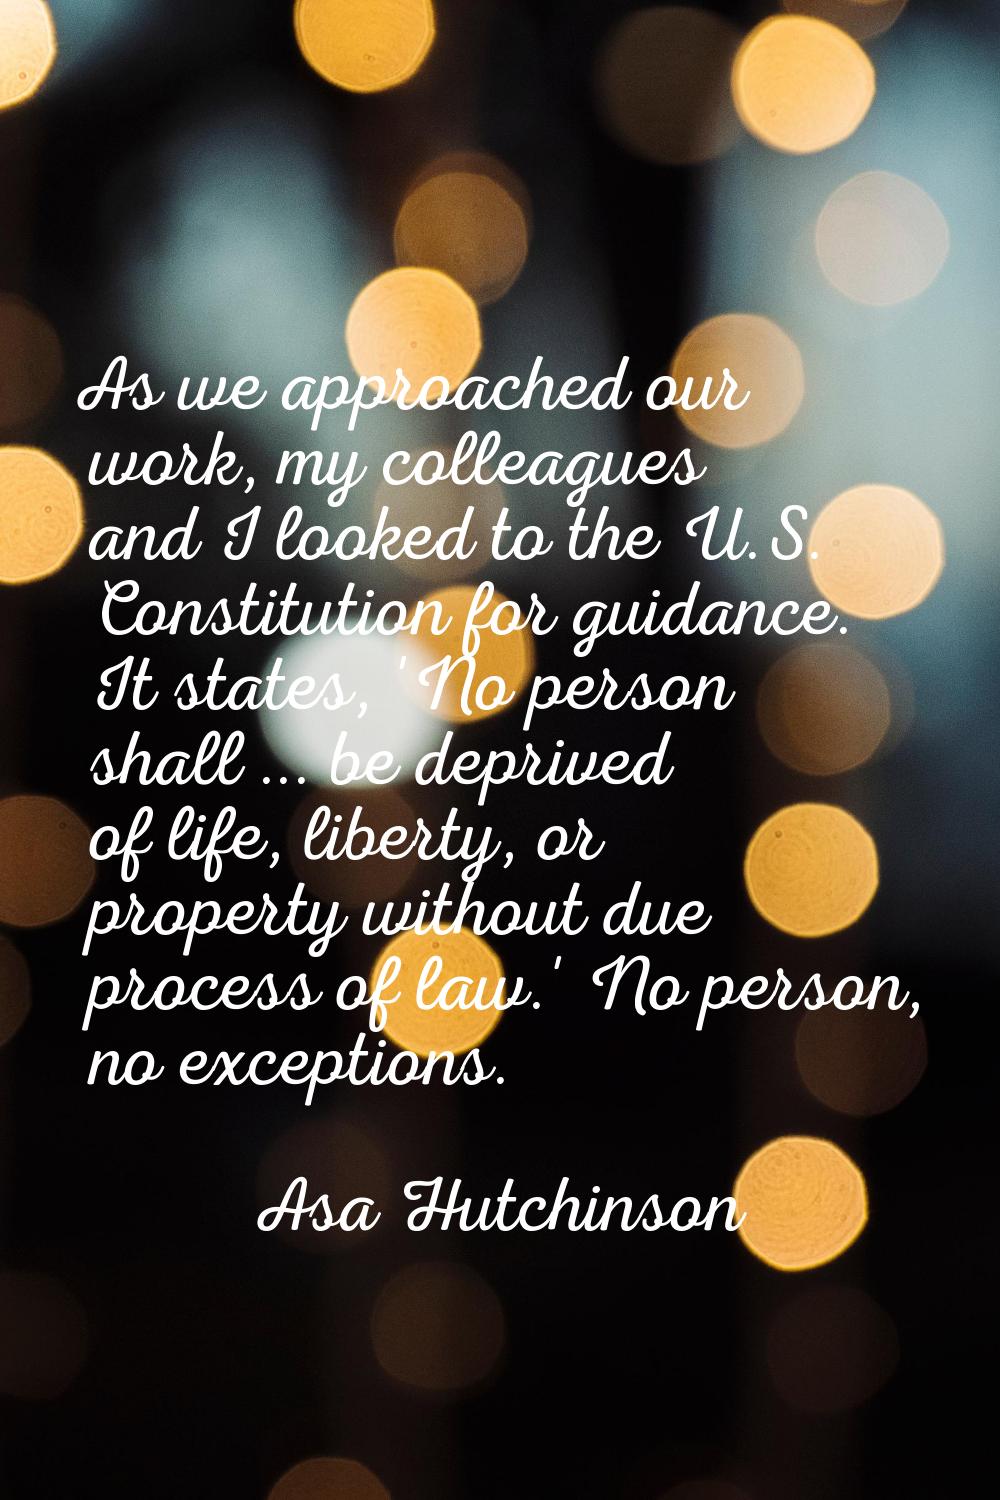 As we approached our work, my colleagues and I looked to the U.S. Constitution for guidance. It sta